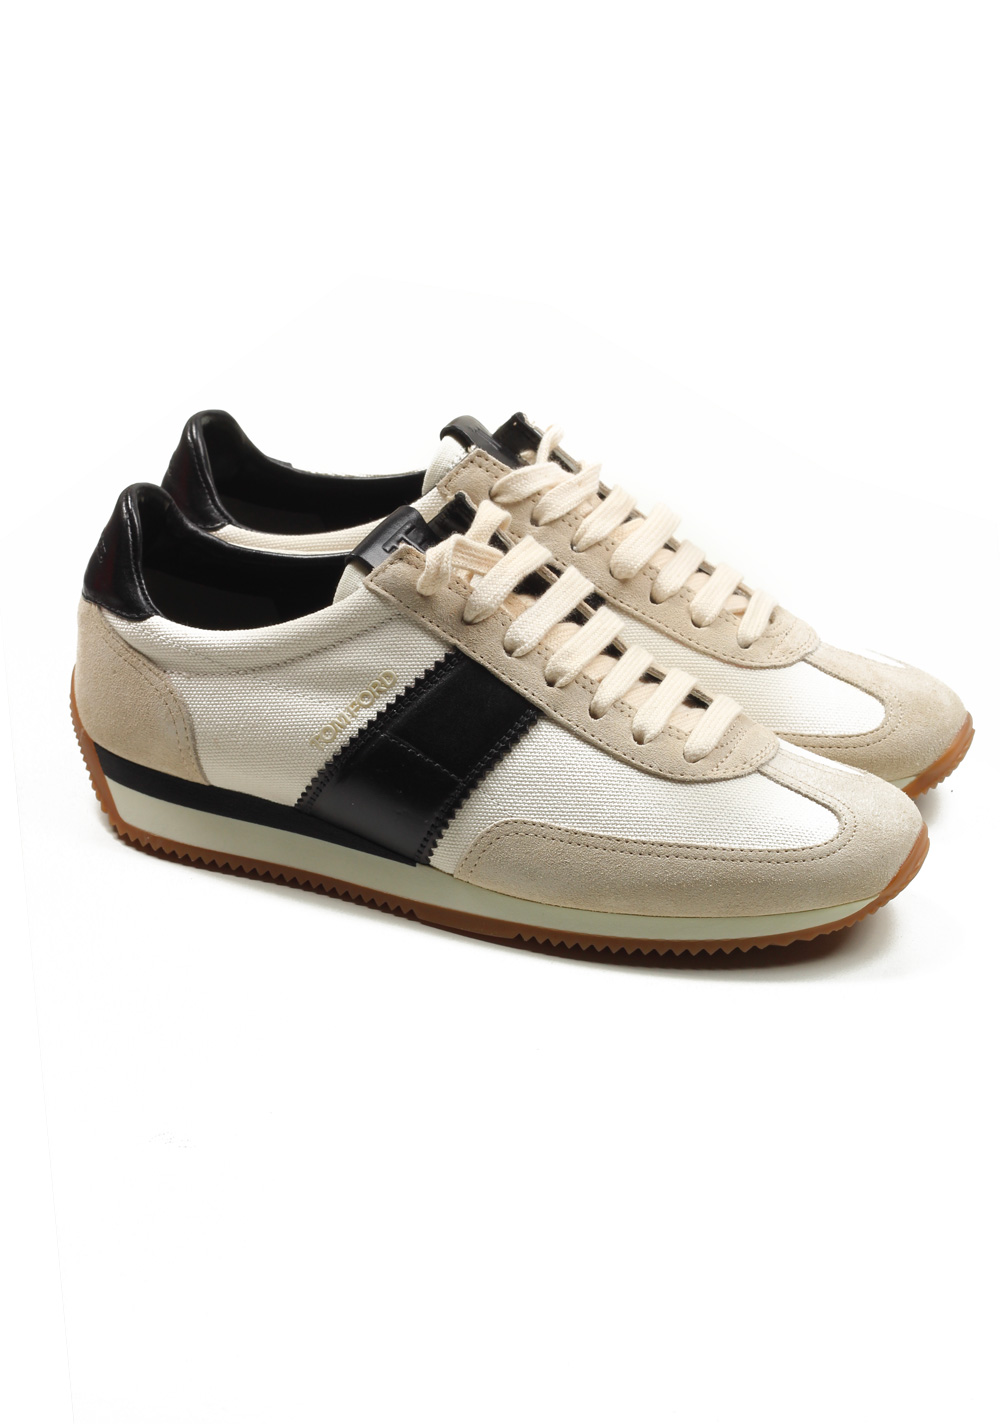 TOM FORD Orford Colorblock Suede White Black Trainer Sneaker Shoes Size 11 UK / 12 U.S. | Costume Limité